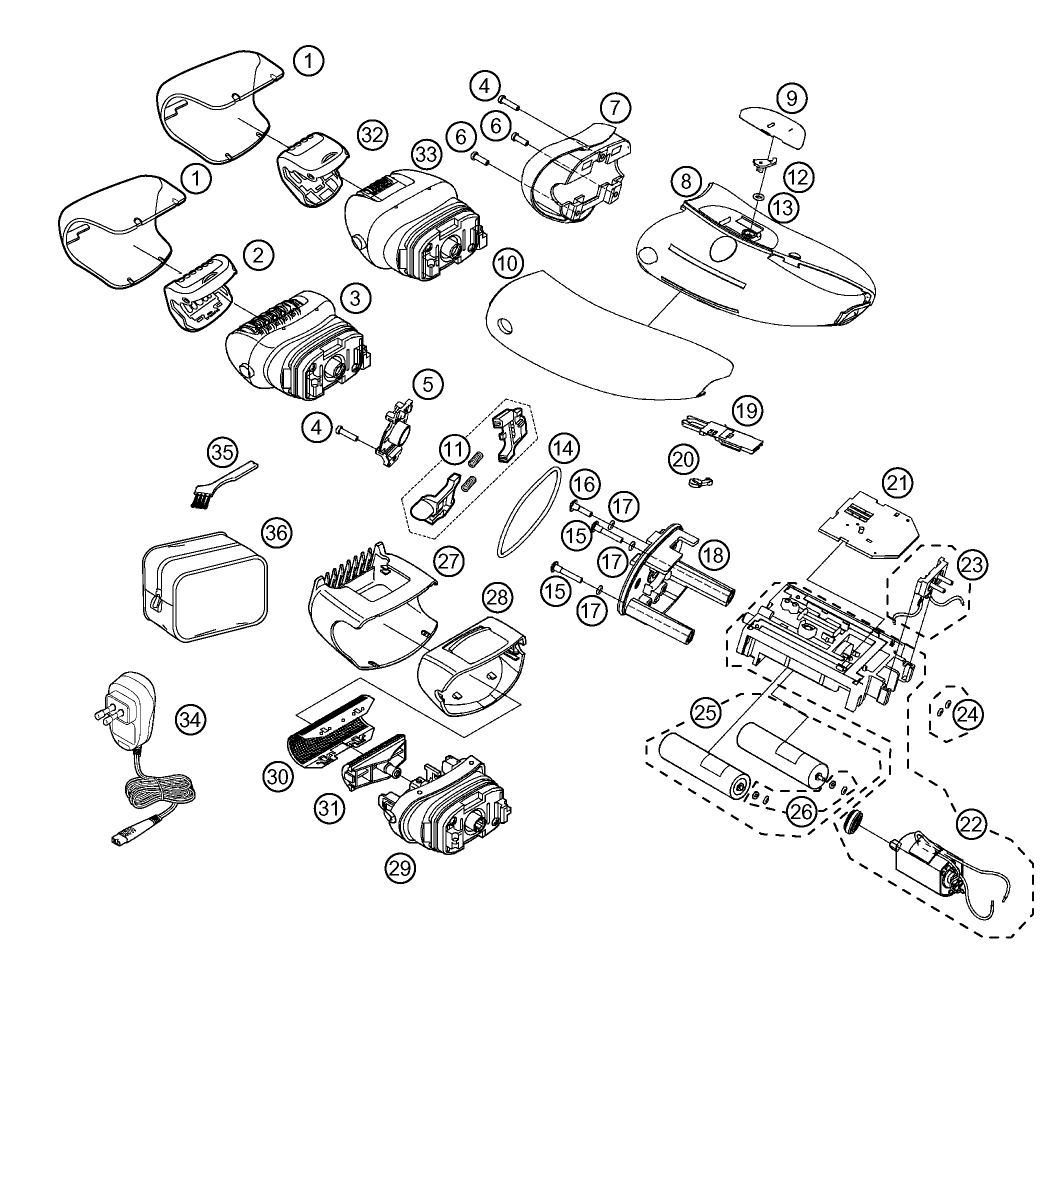 ES-2057: Exploded View